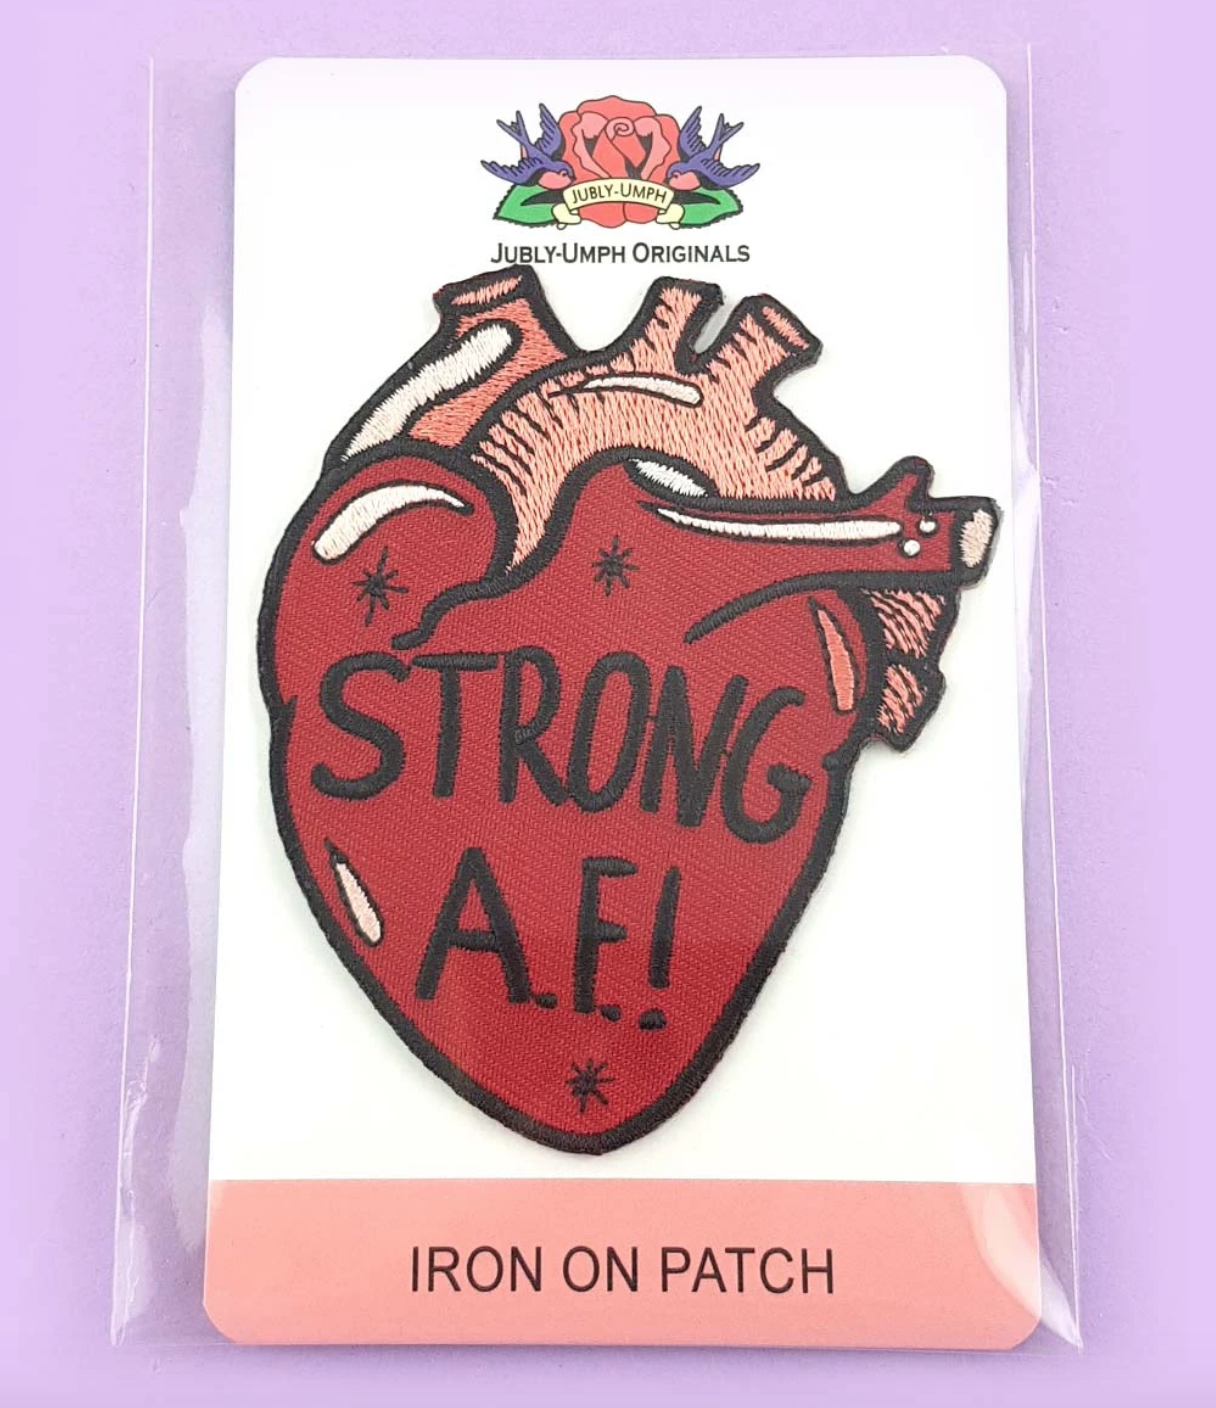 Strong A.F! | Embroidered Patch | Jubly-Umph